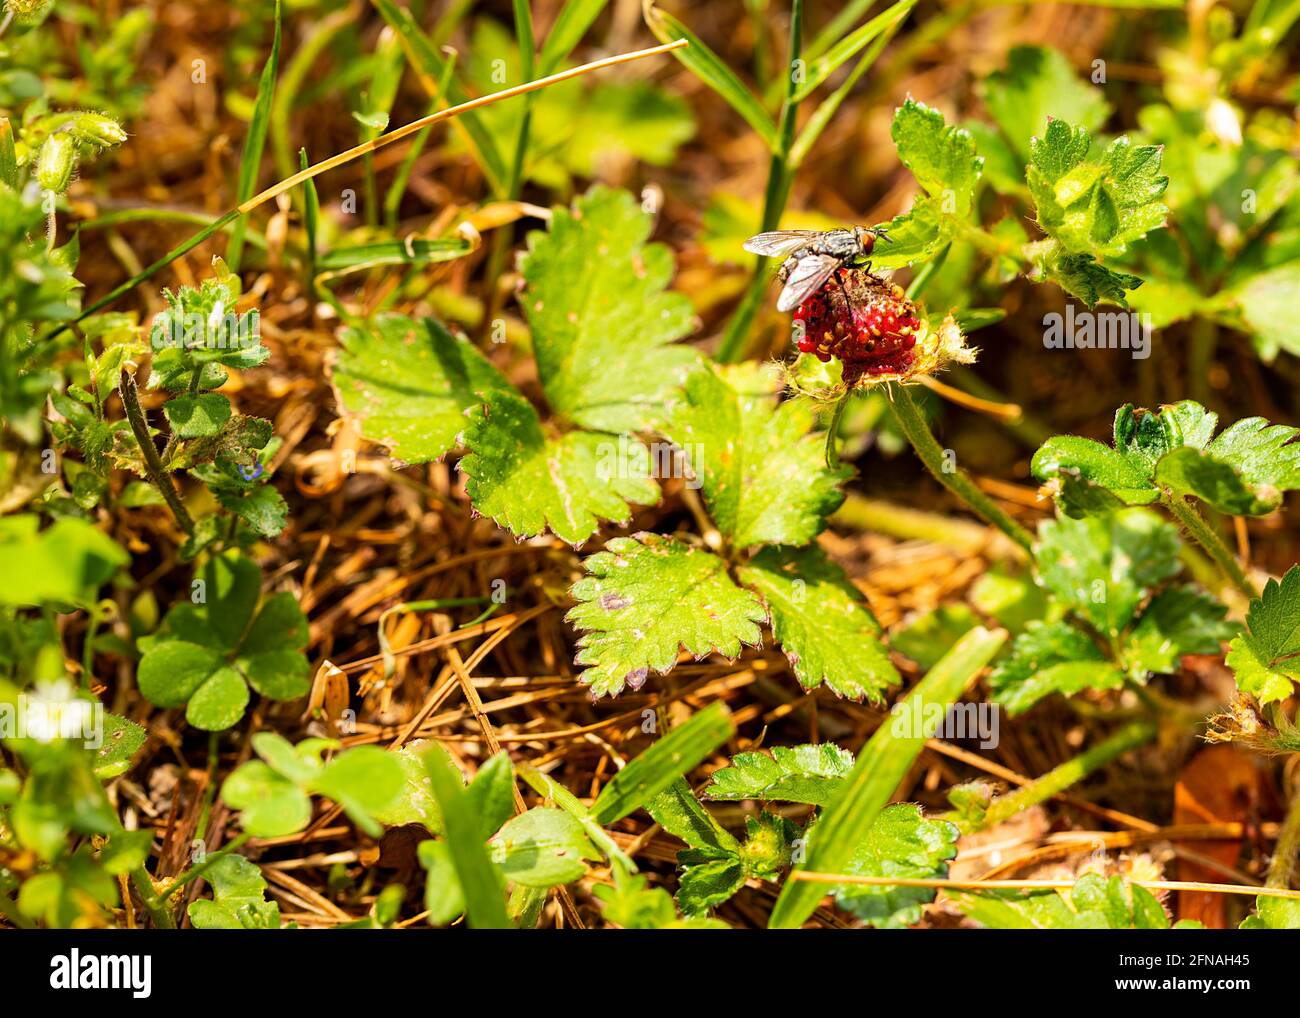 A house fly perches on a wild berry in a field. Stock Photo